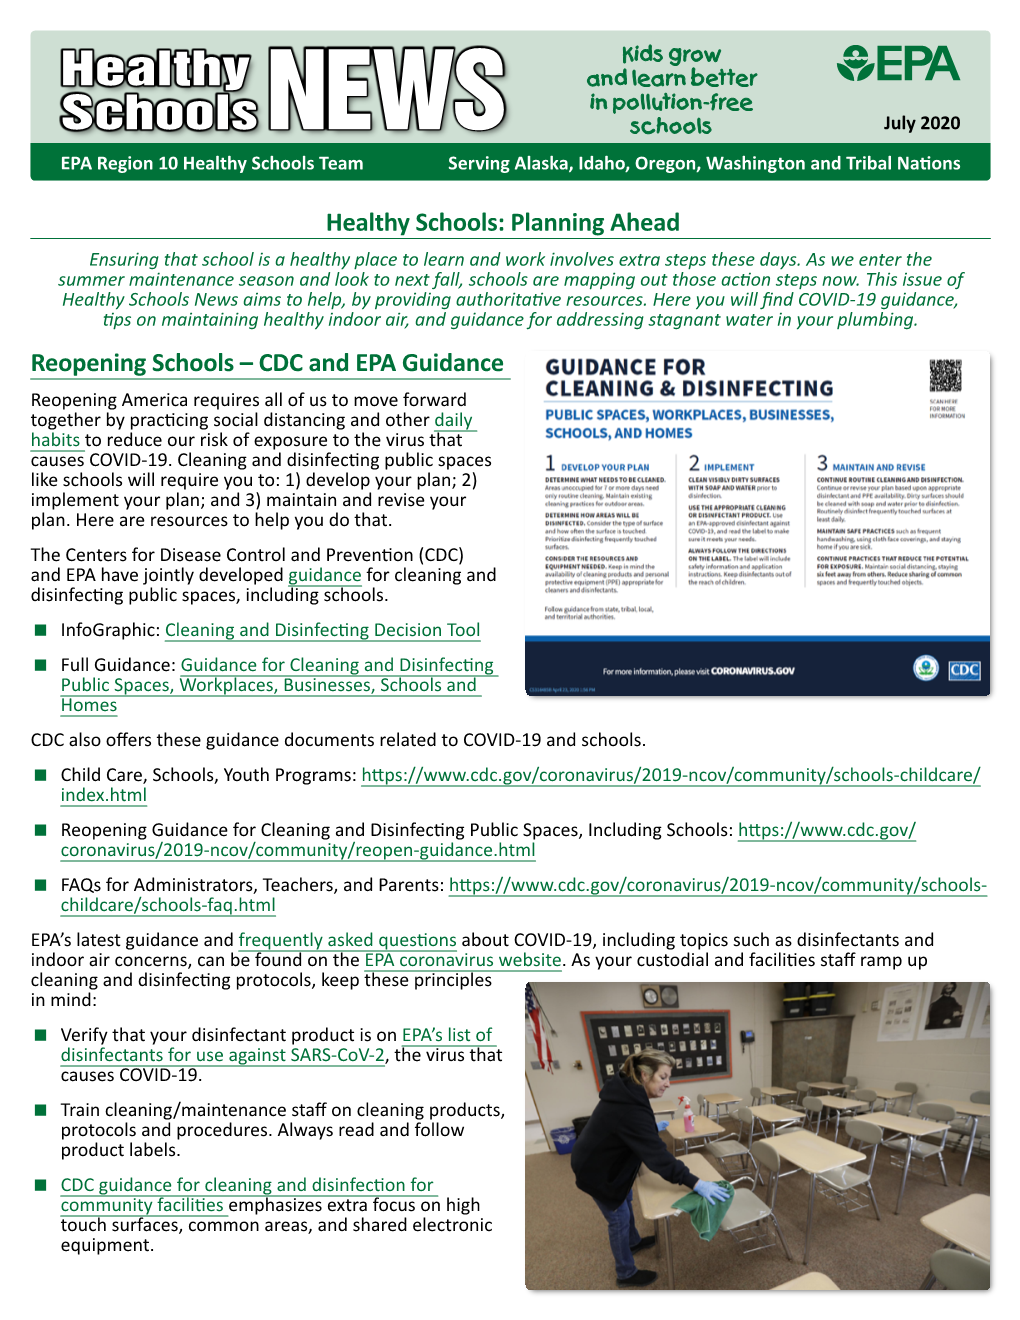 Healthy Schools News Aims to Help, by Providing Authoritative Resources